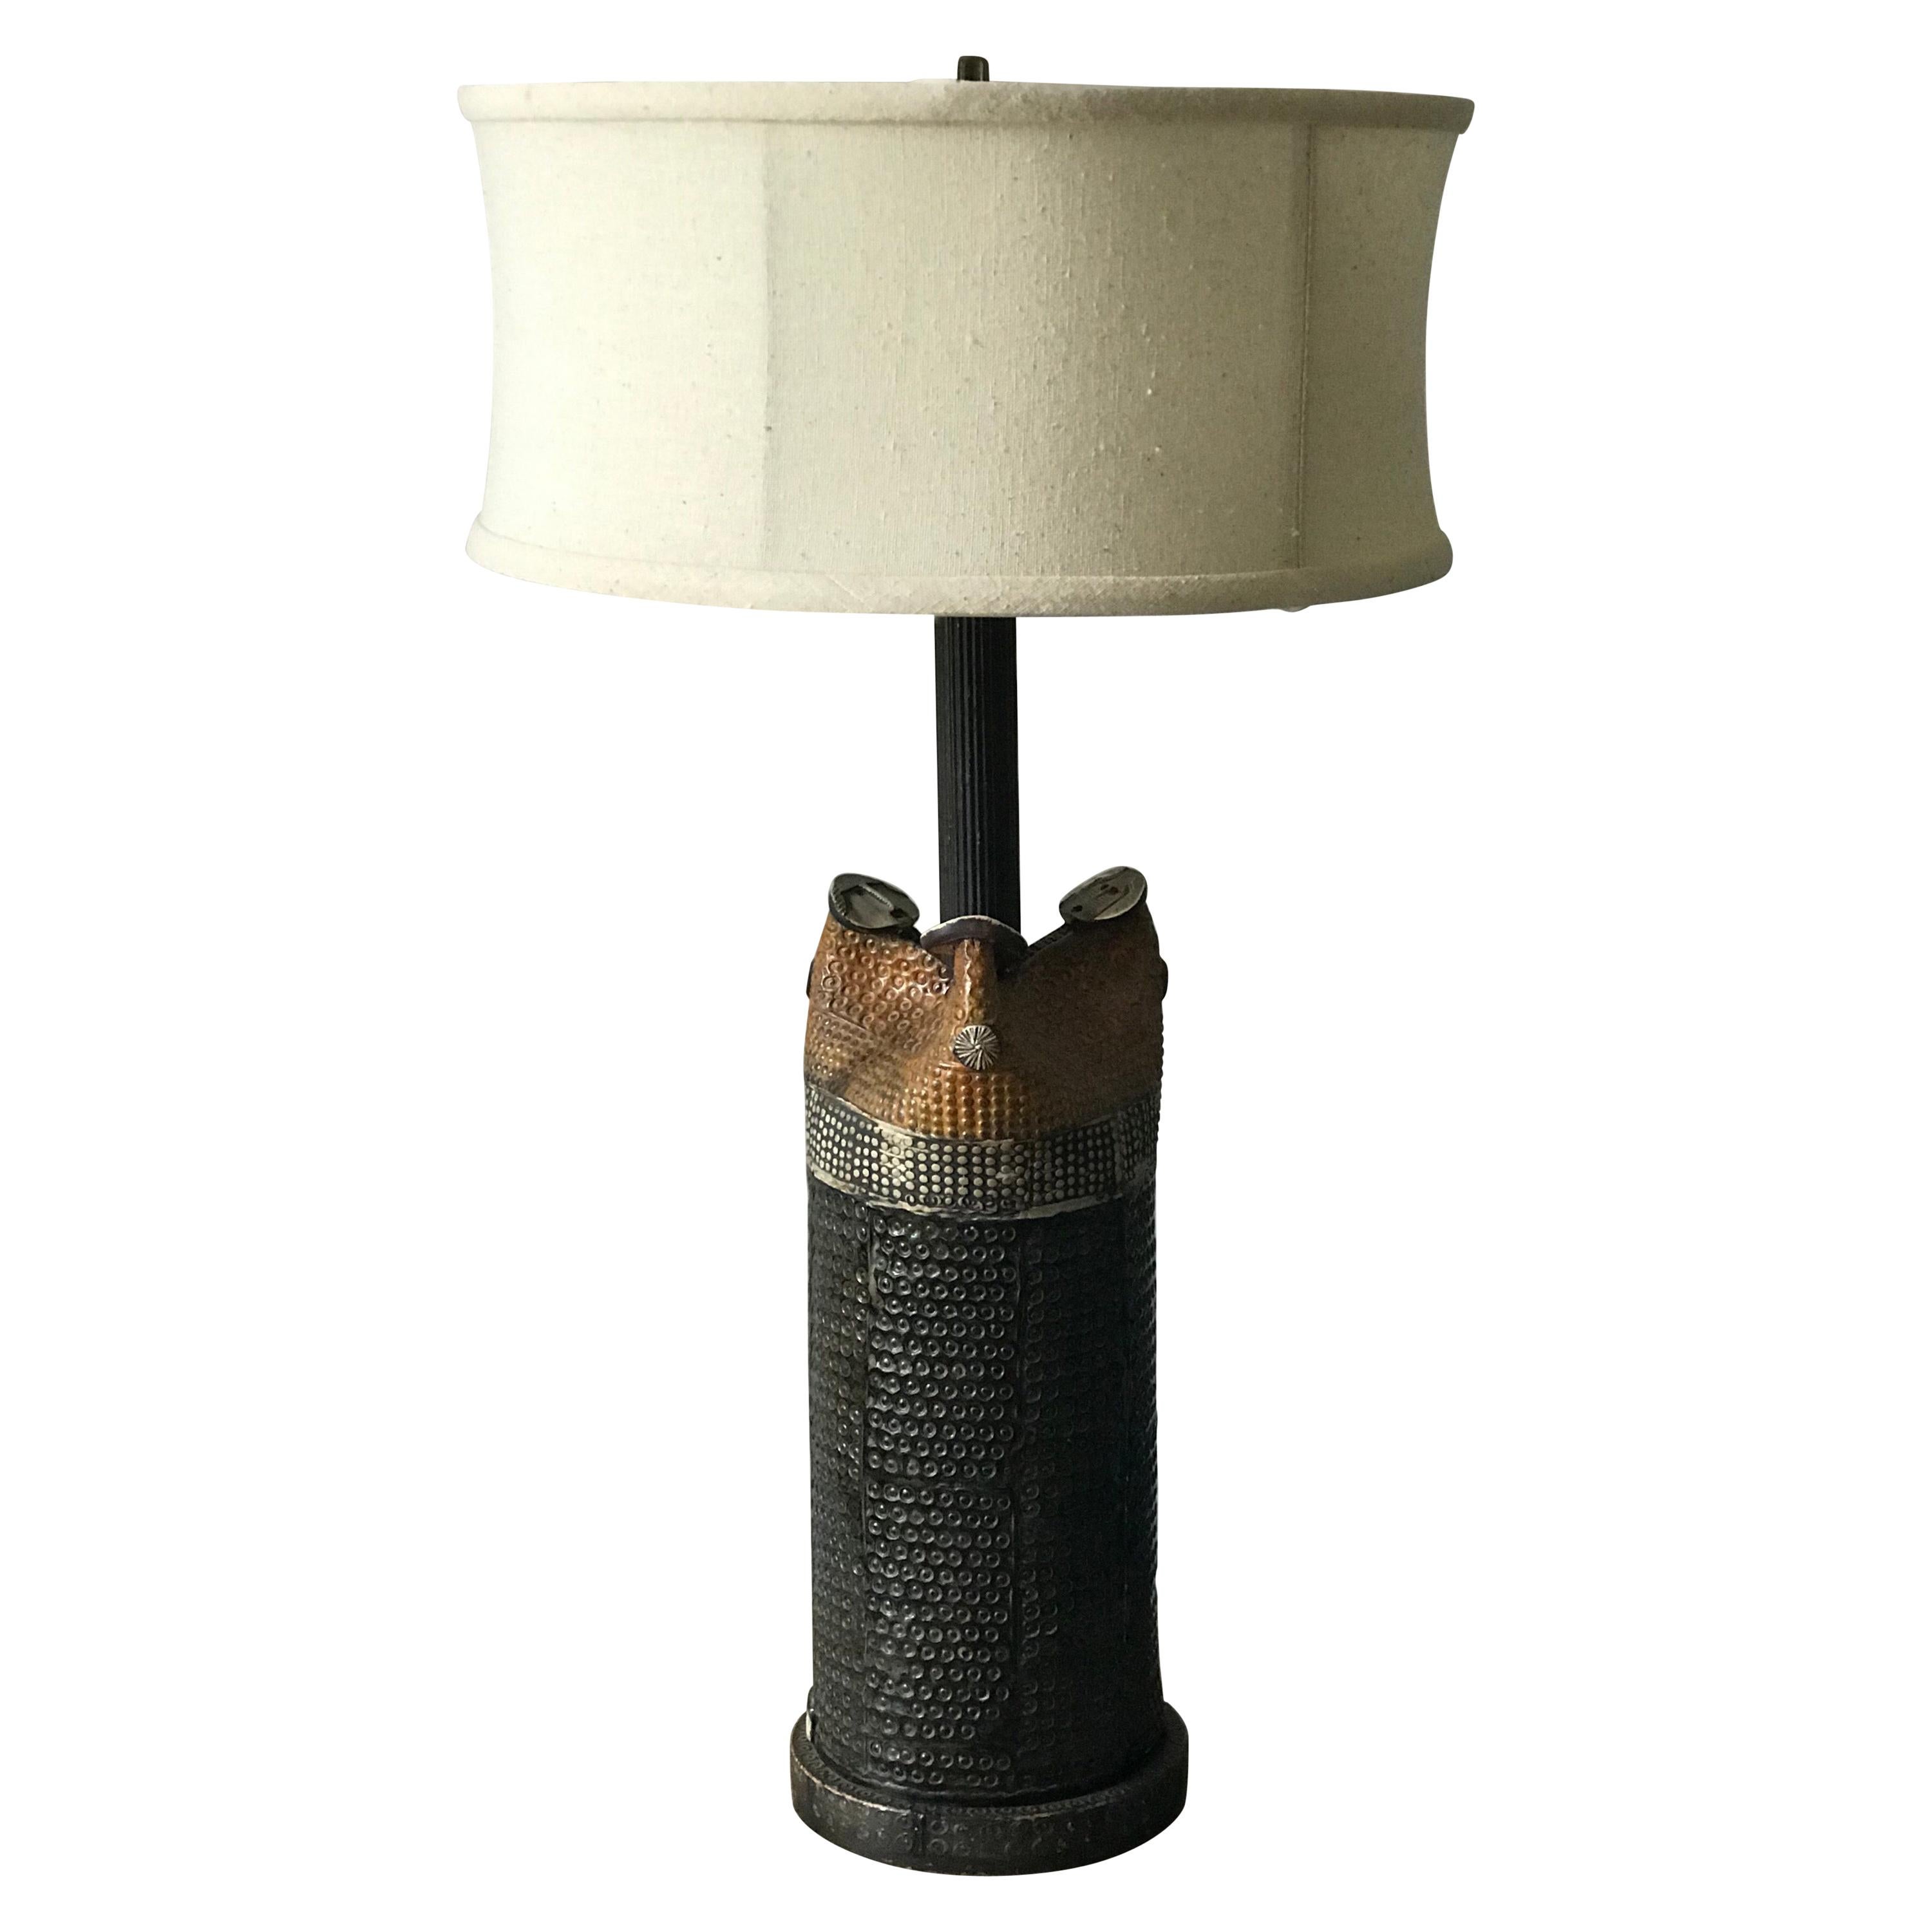 Exceptional Ceramic Lamp by Bengt Berglund for Gustavsberg For Sale